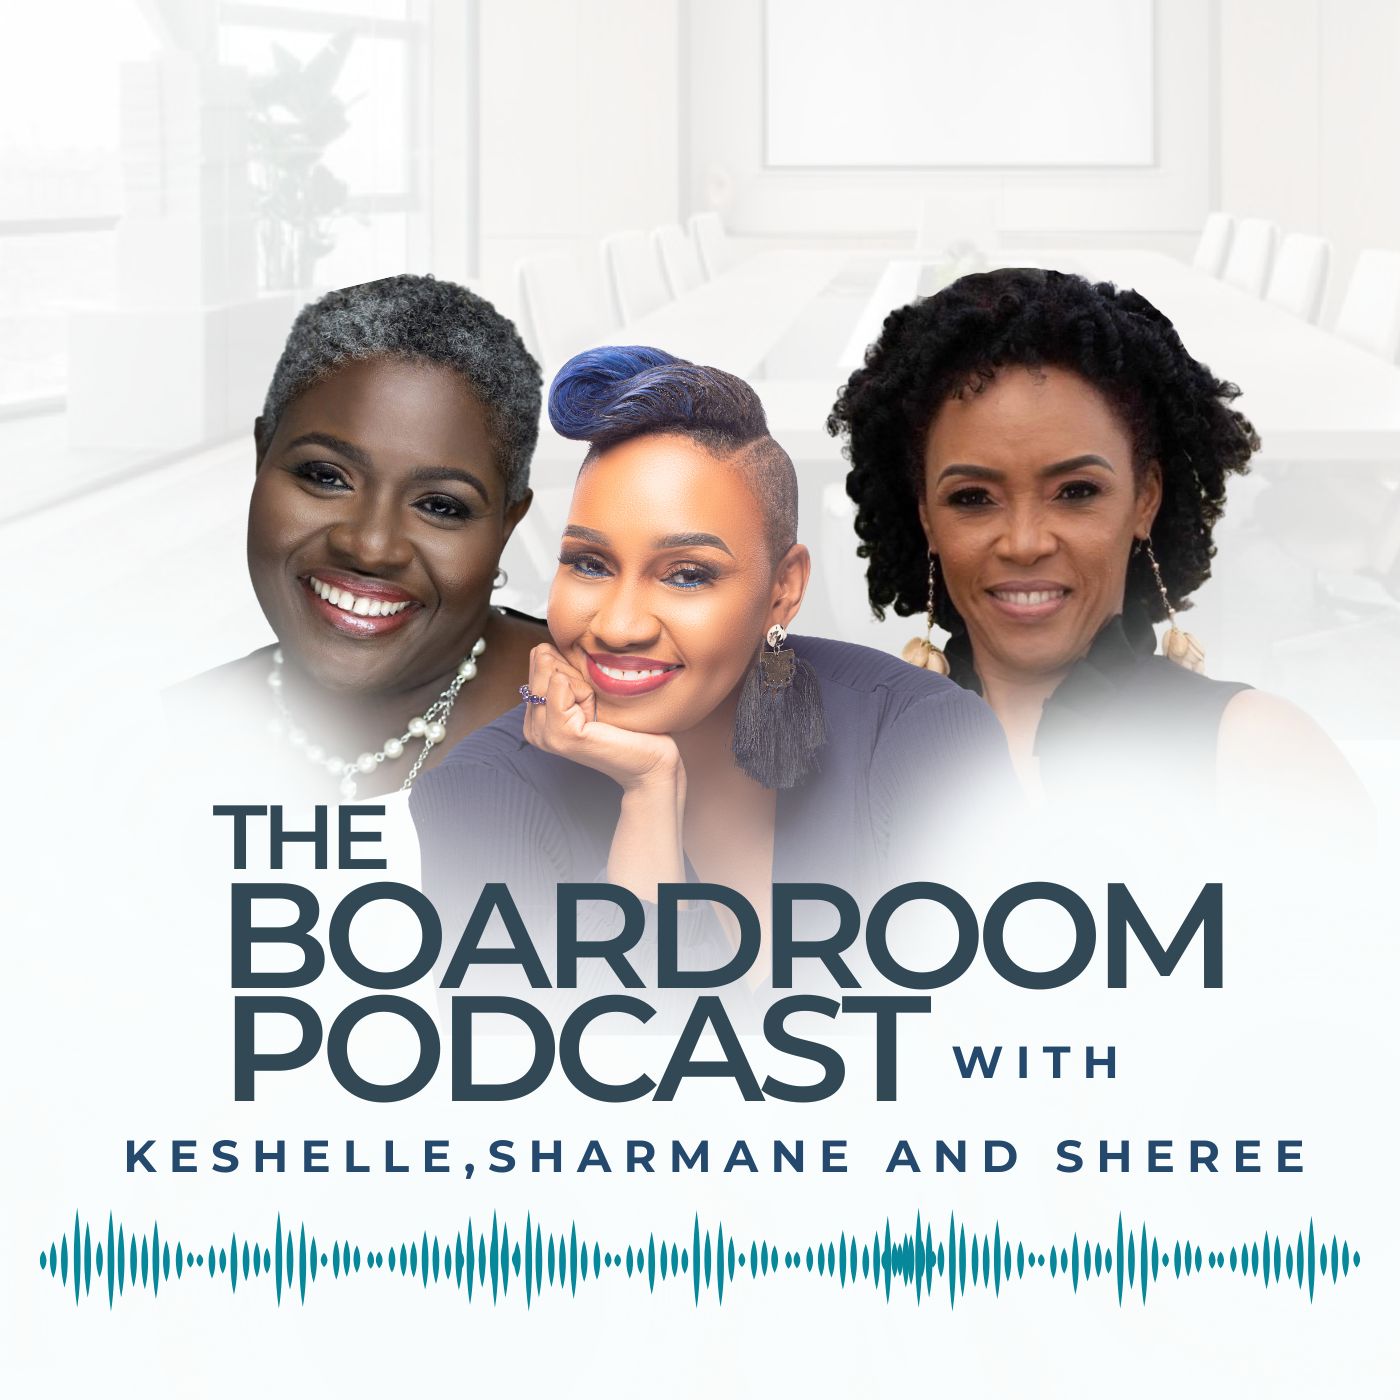 Artwork for The Boardroom Podcast